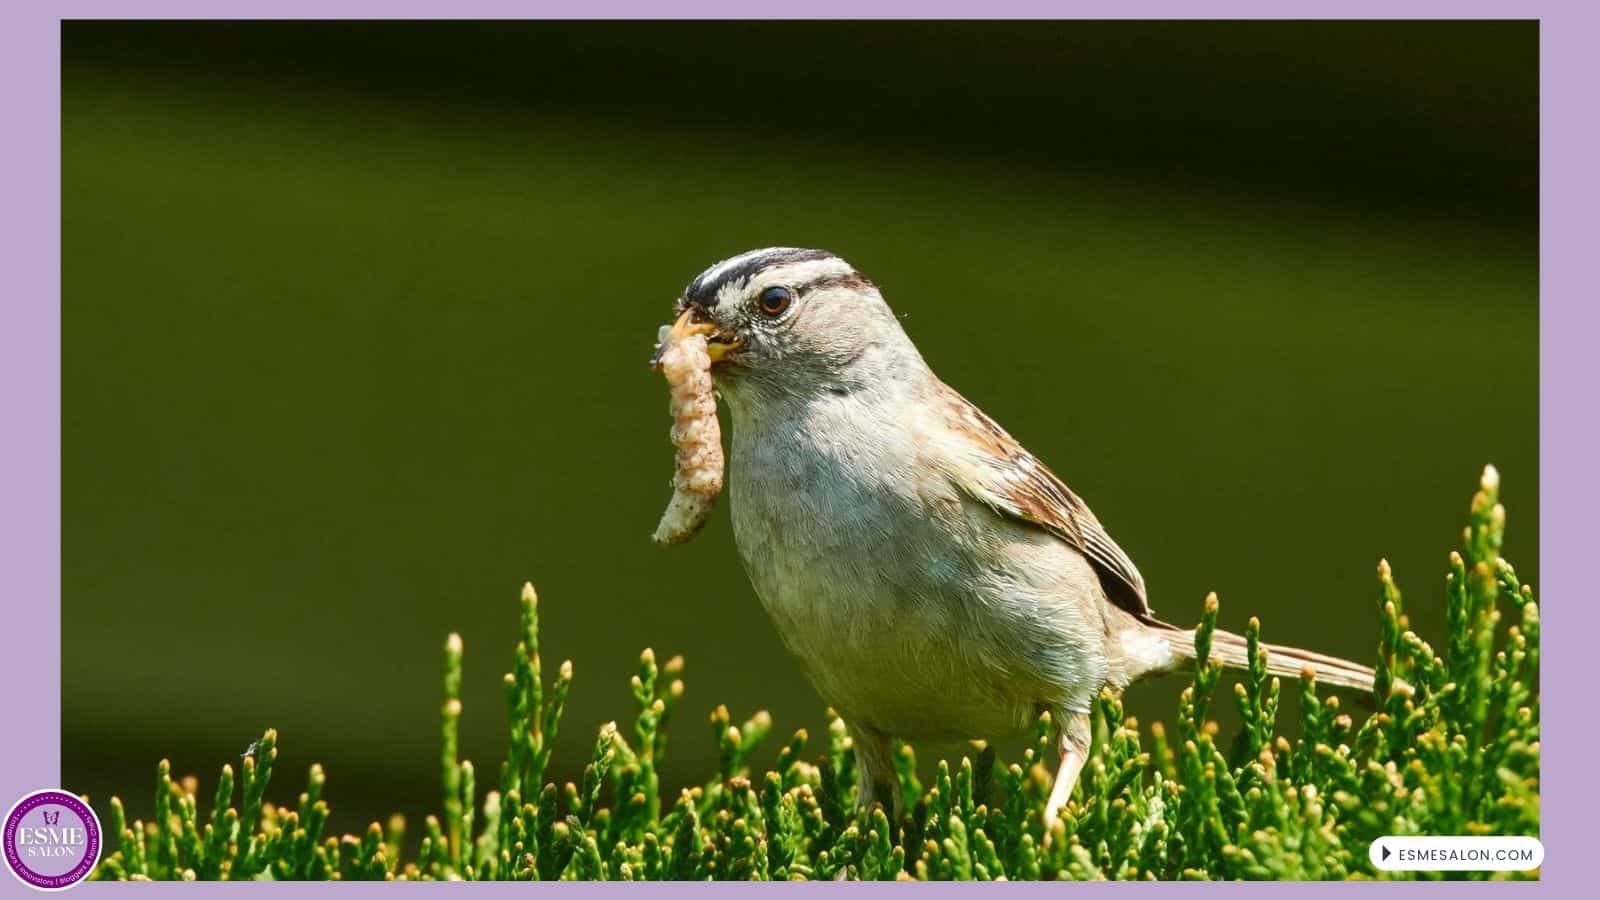 an image of White-crowned Sparrow with a worm in its beak